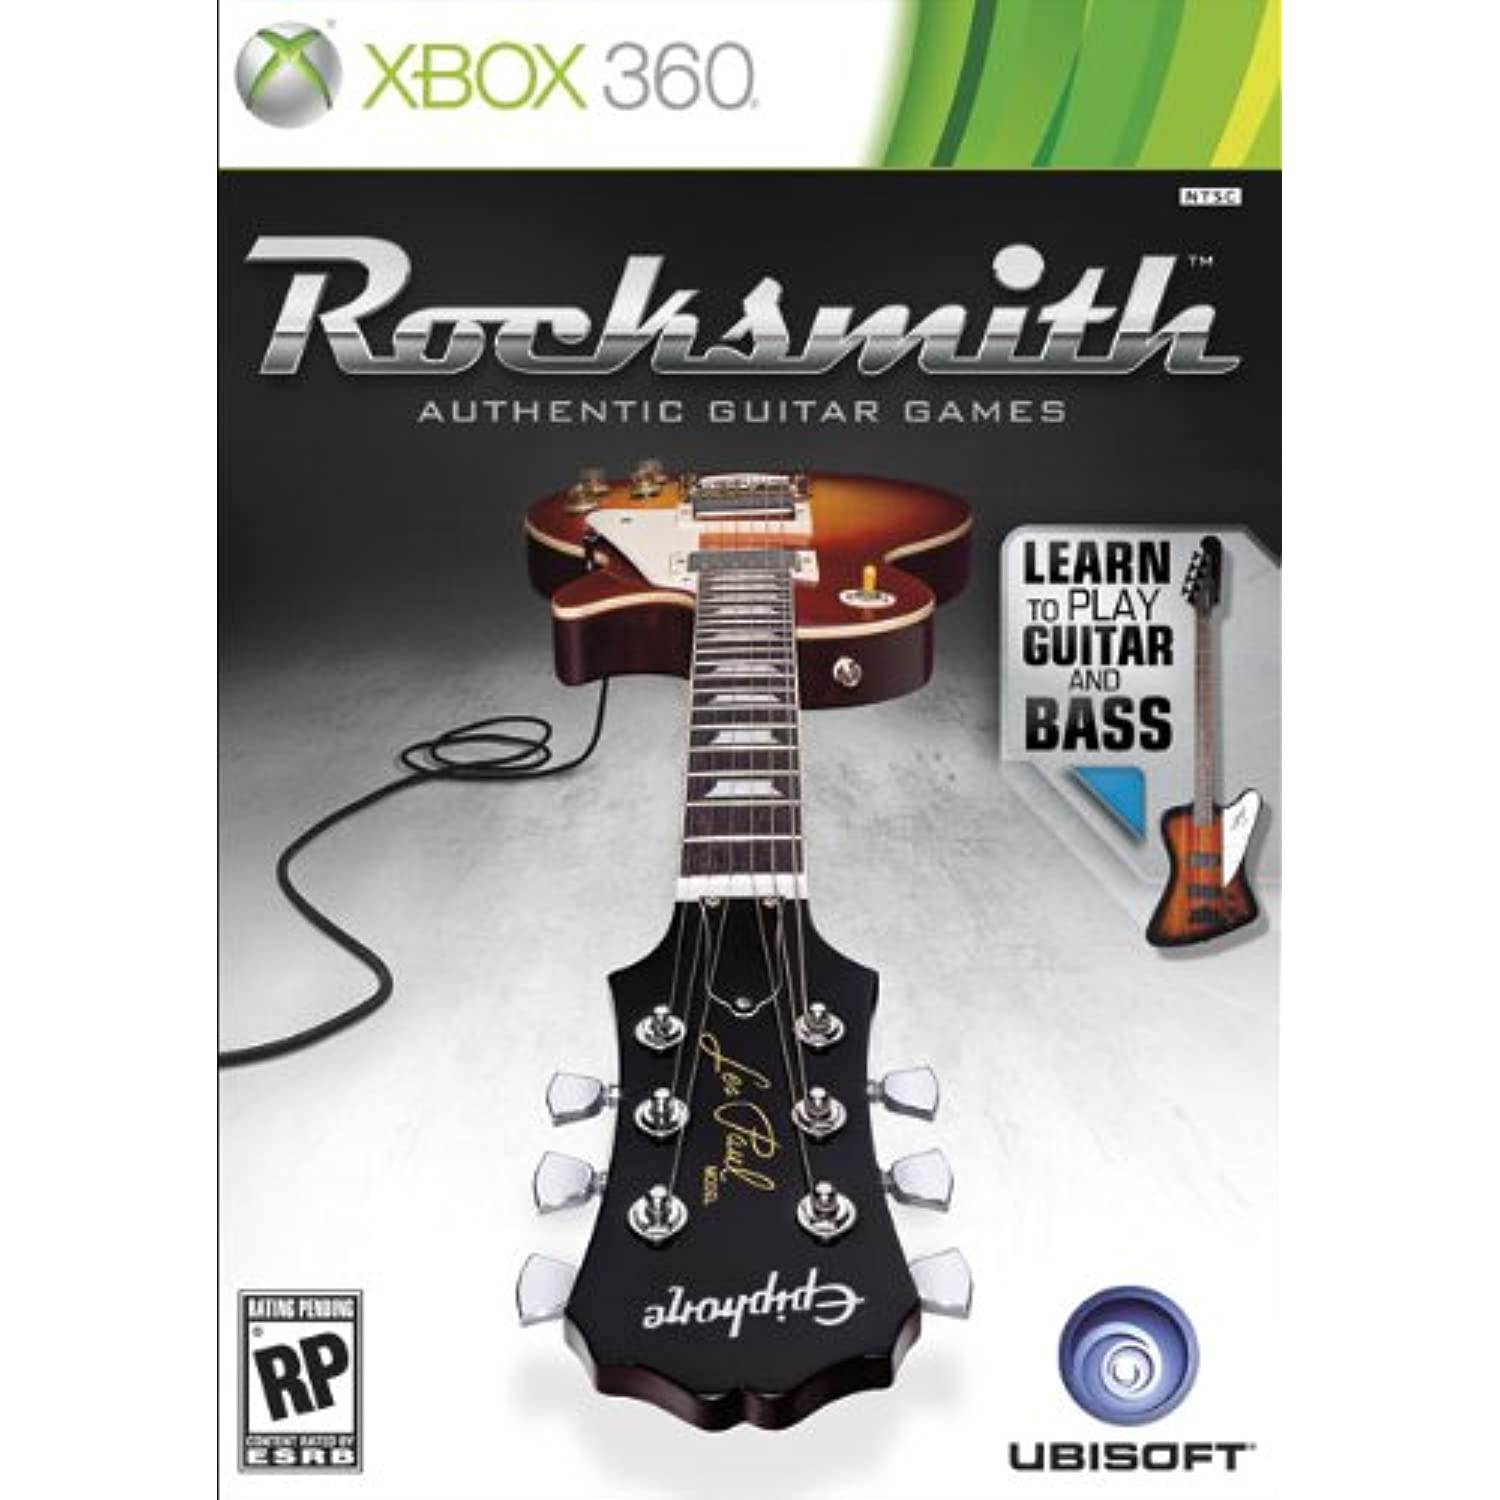 Rocksmith For Guitar And Bass (Game Software Only) (No Cable Included) - image 1 of 1